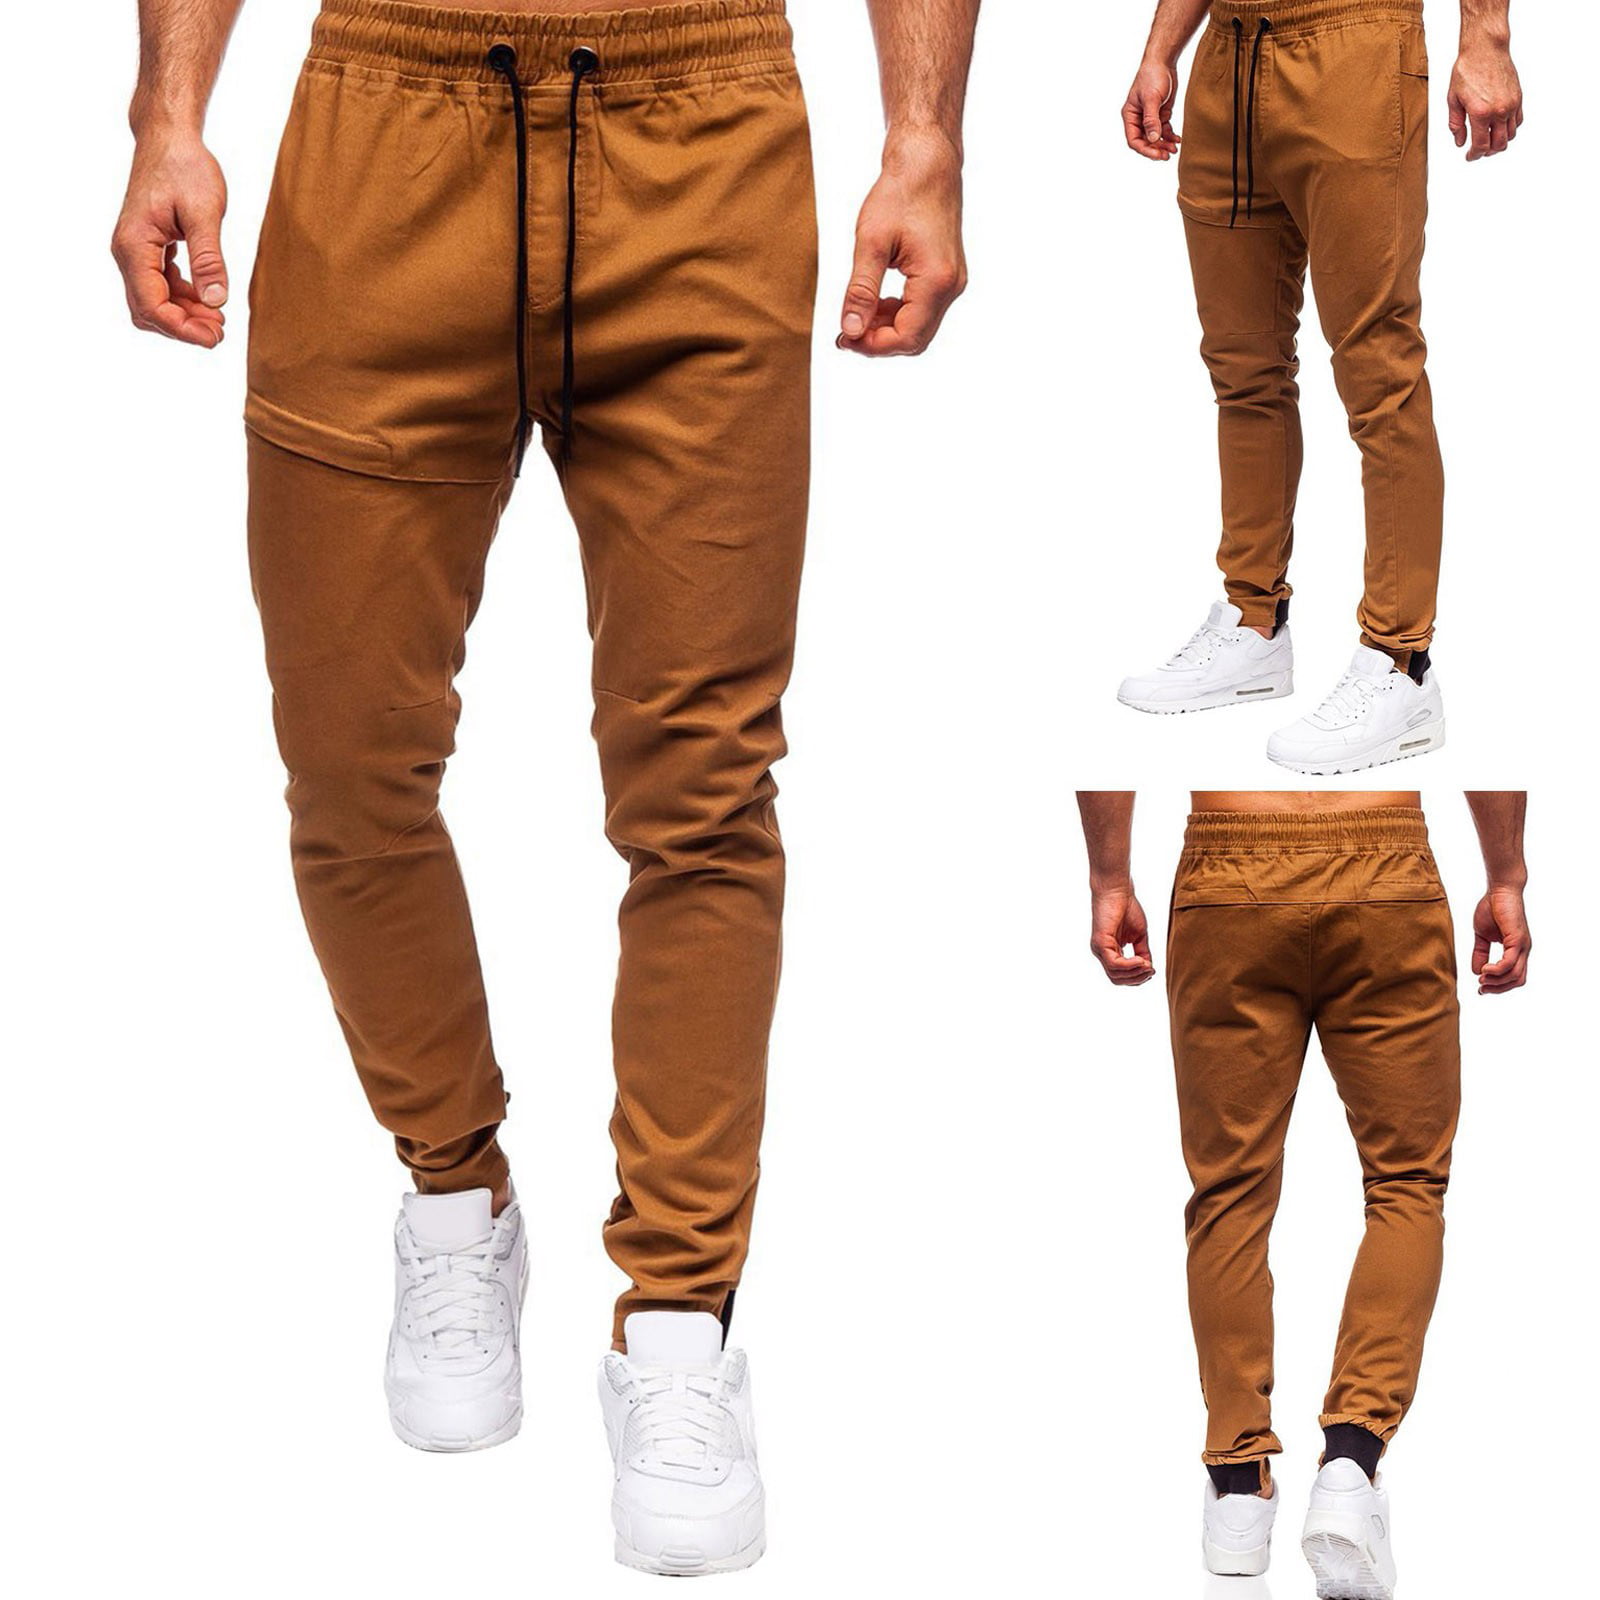 Brown Sweatpants For Men Male Casual Business Solid Slim Pants